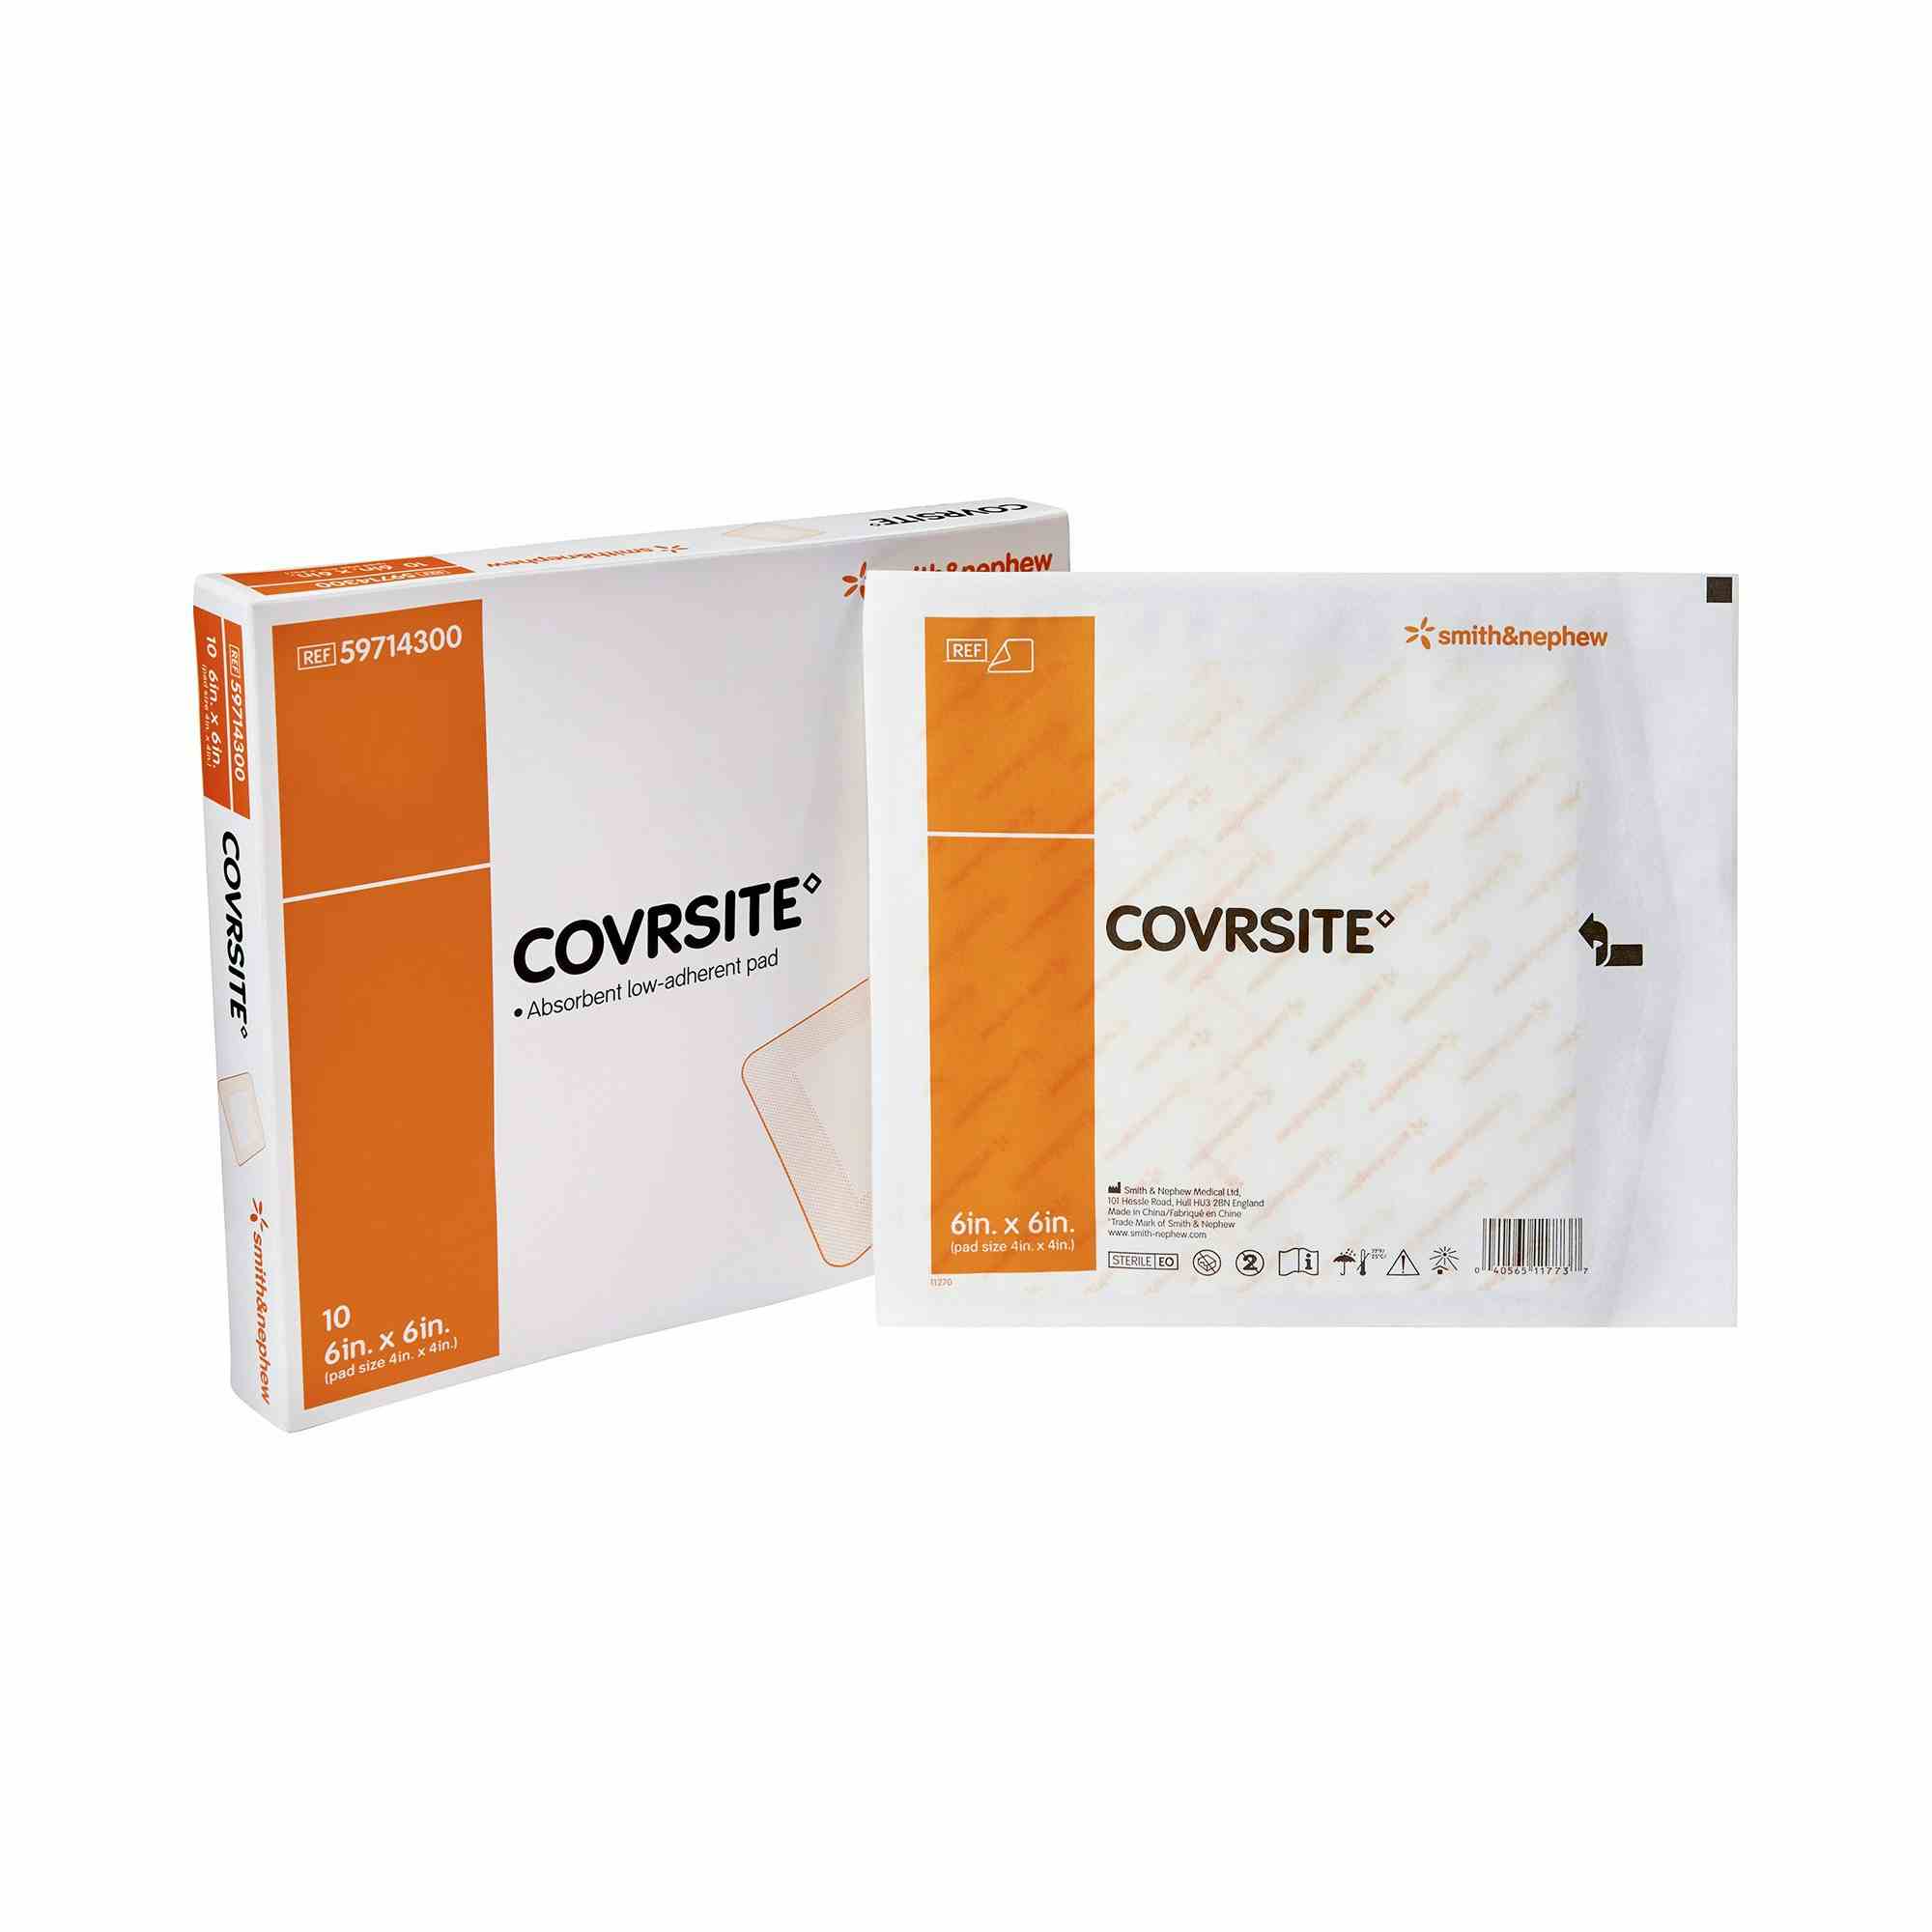 Coversite Cover Dressing, 6 X 6", 59714300, Box of 10